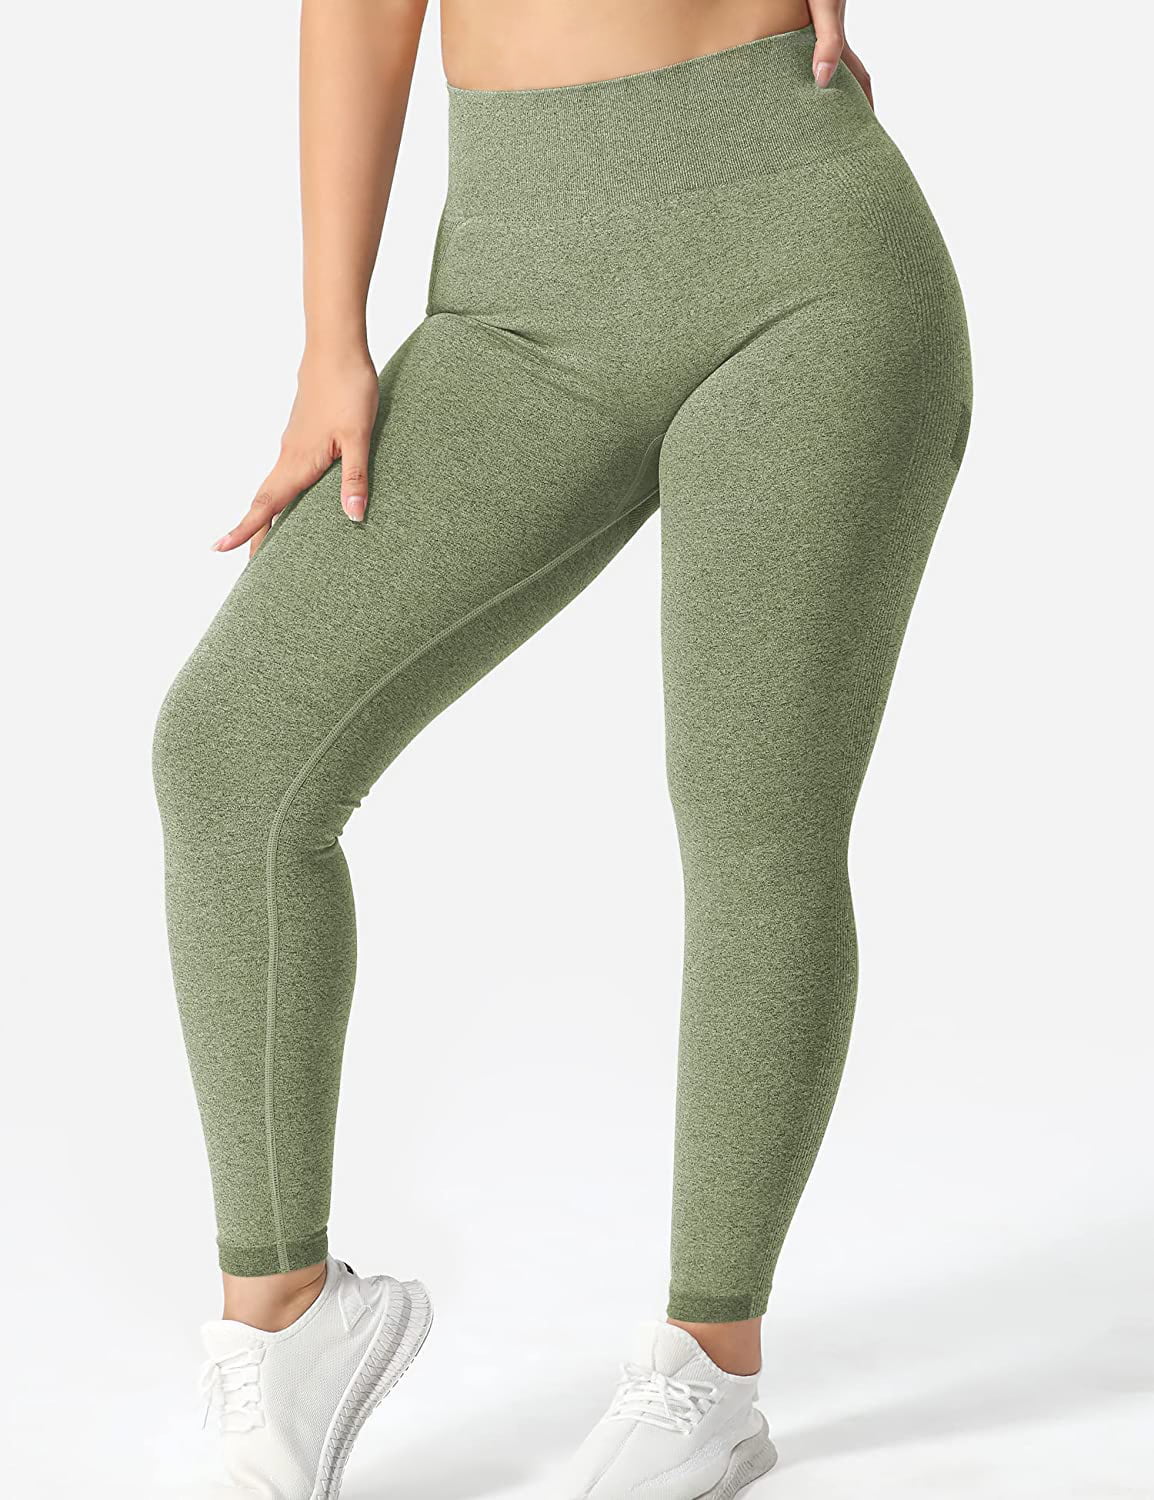 FeelinGirl High Waisted Leggings for Women Tummy Control Running Yoga Pants Seamless  Compression Workout Leggings Green at  Women's Clothing store